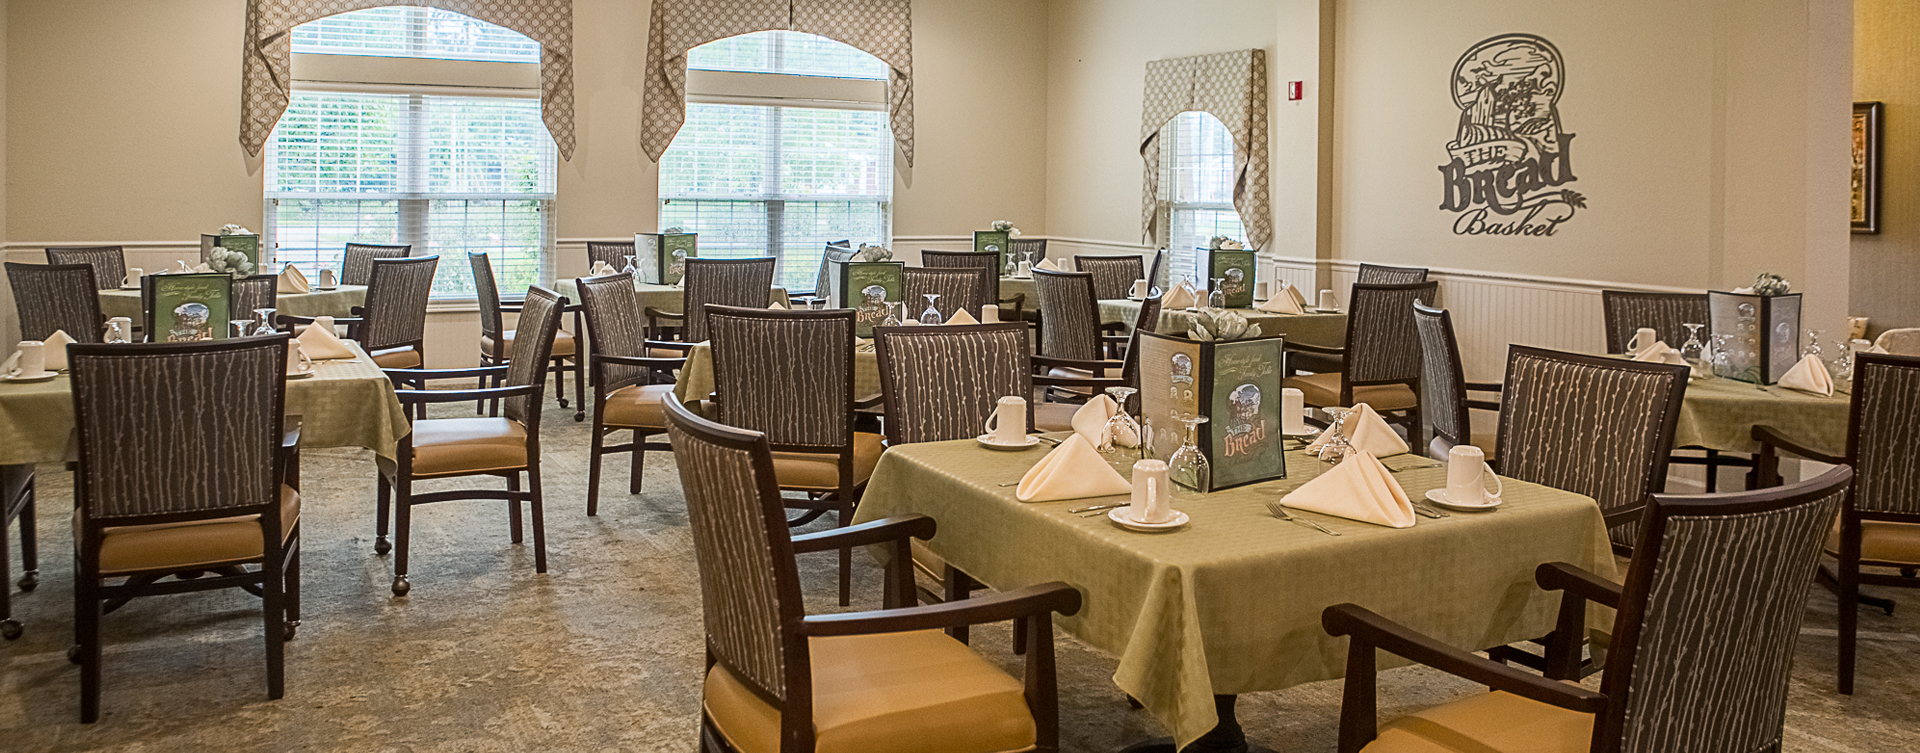 Enjoy restaurant -style meals served three times a day in our dining room at Bickford of Clinton